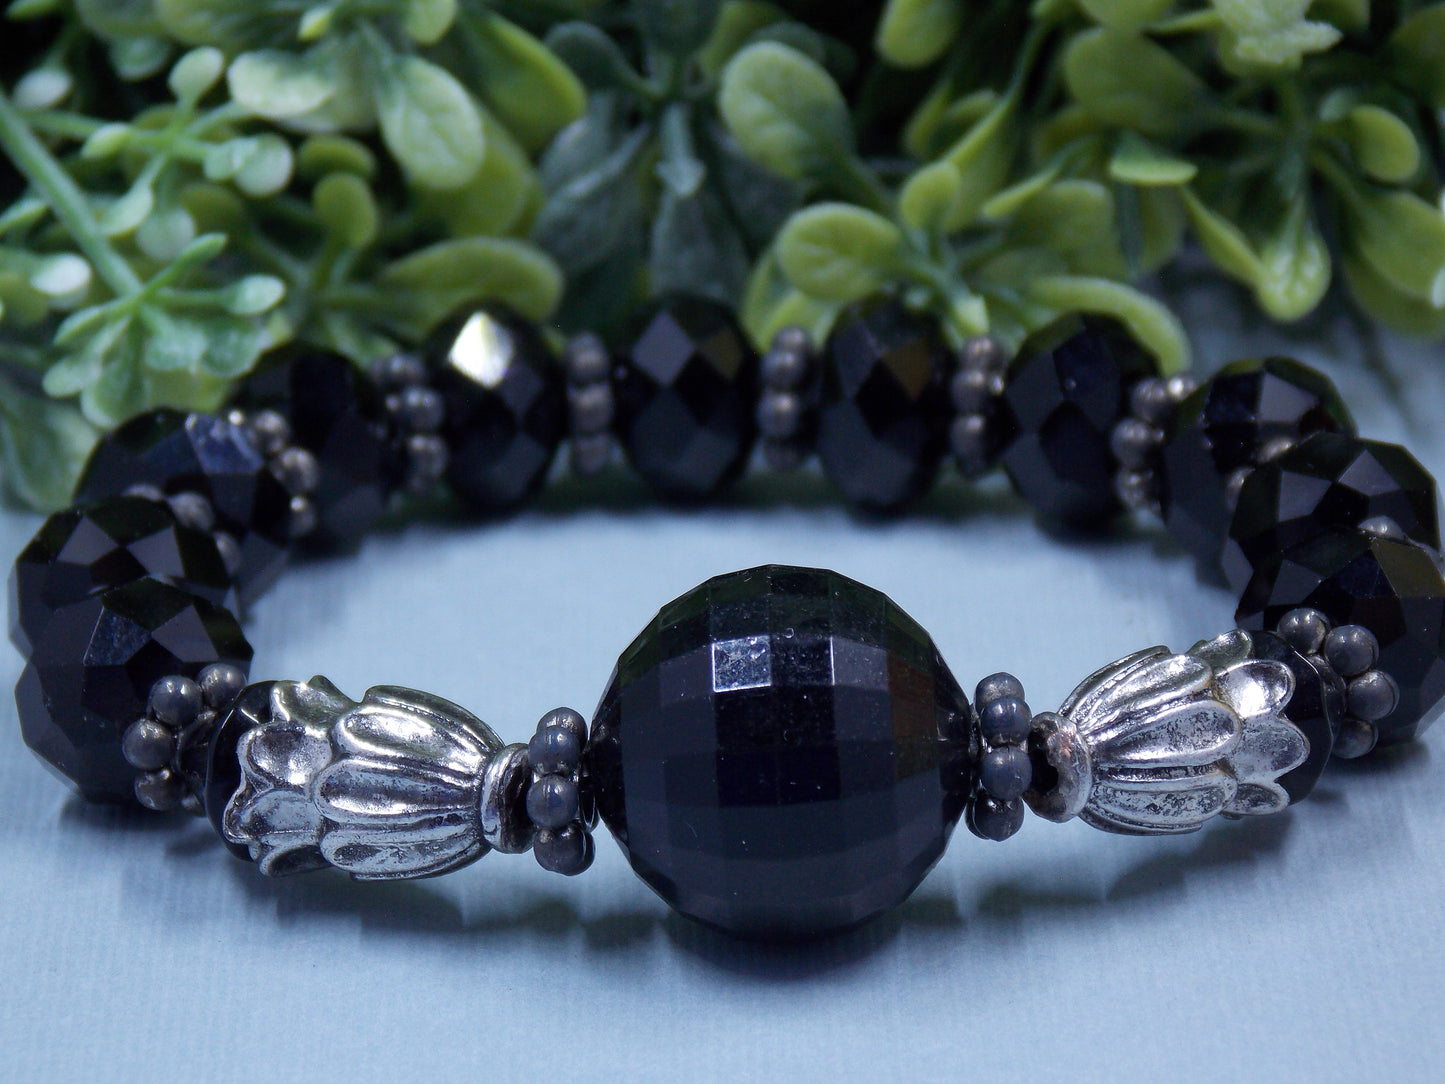 Black Center Stone with Glass Beads